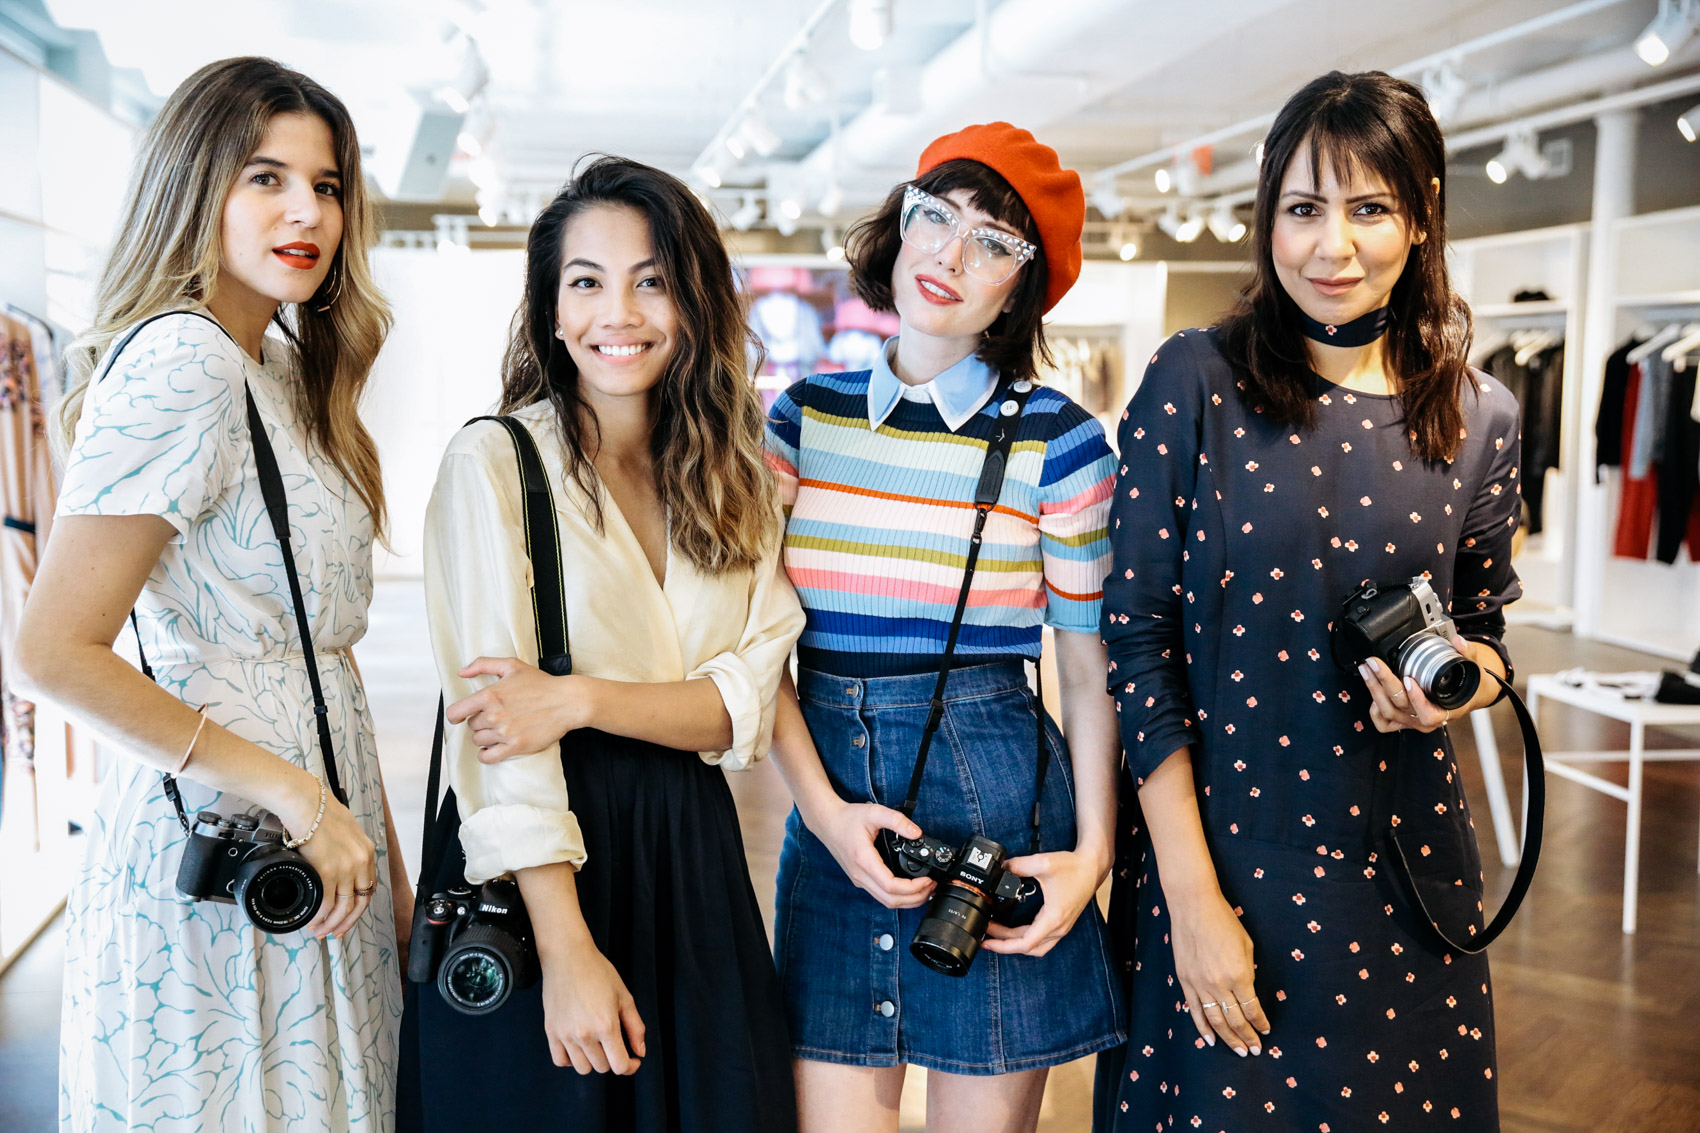 The 2016 Bloglovin Awards nominees for Breakthrough Fashion Blogger Of The Year at the H&M showroom in New York